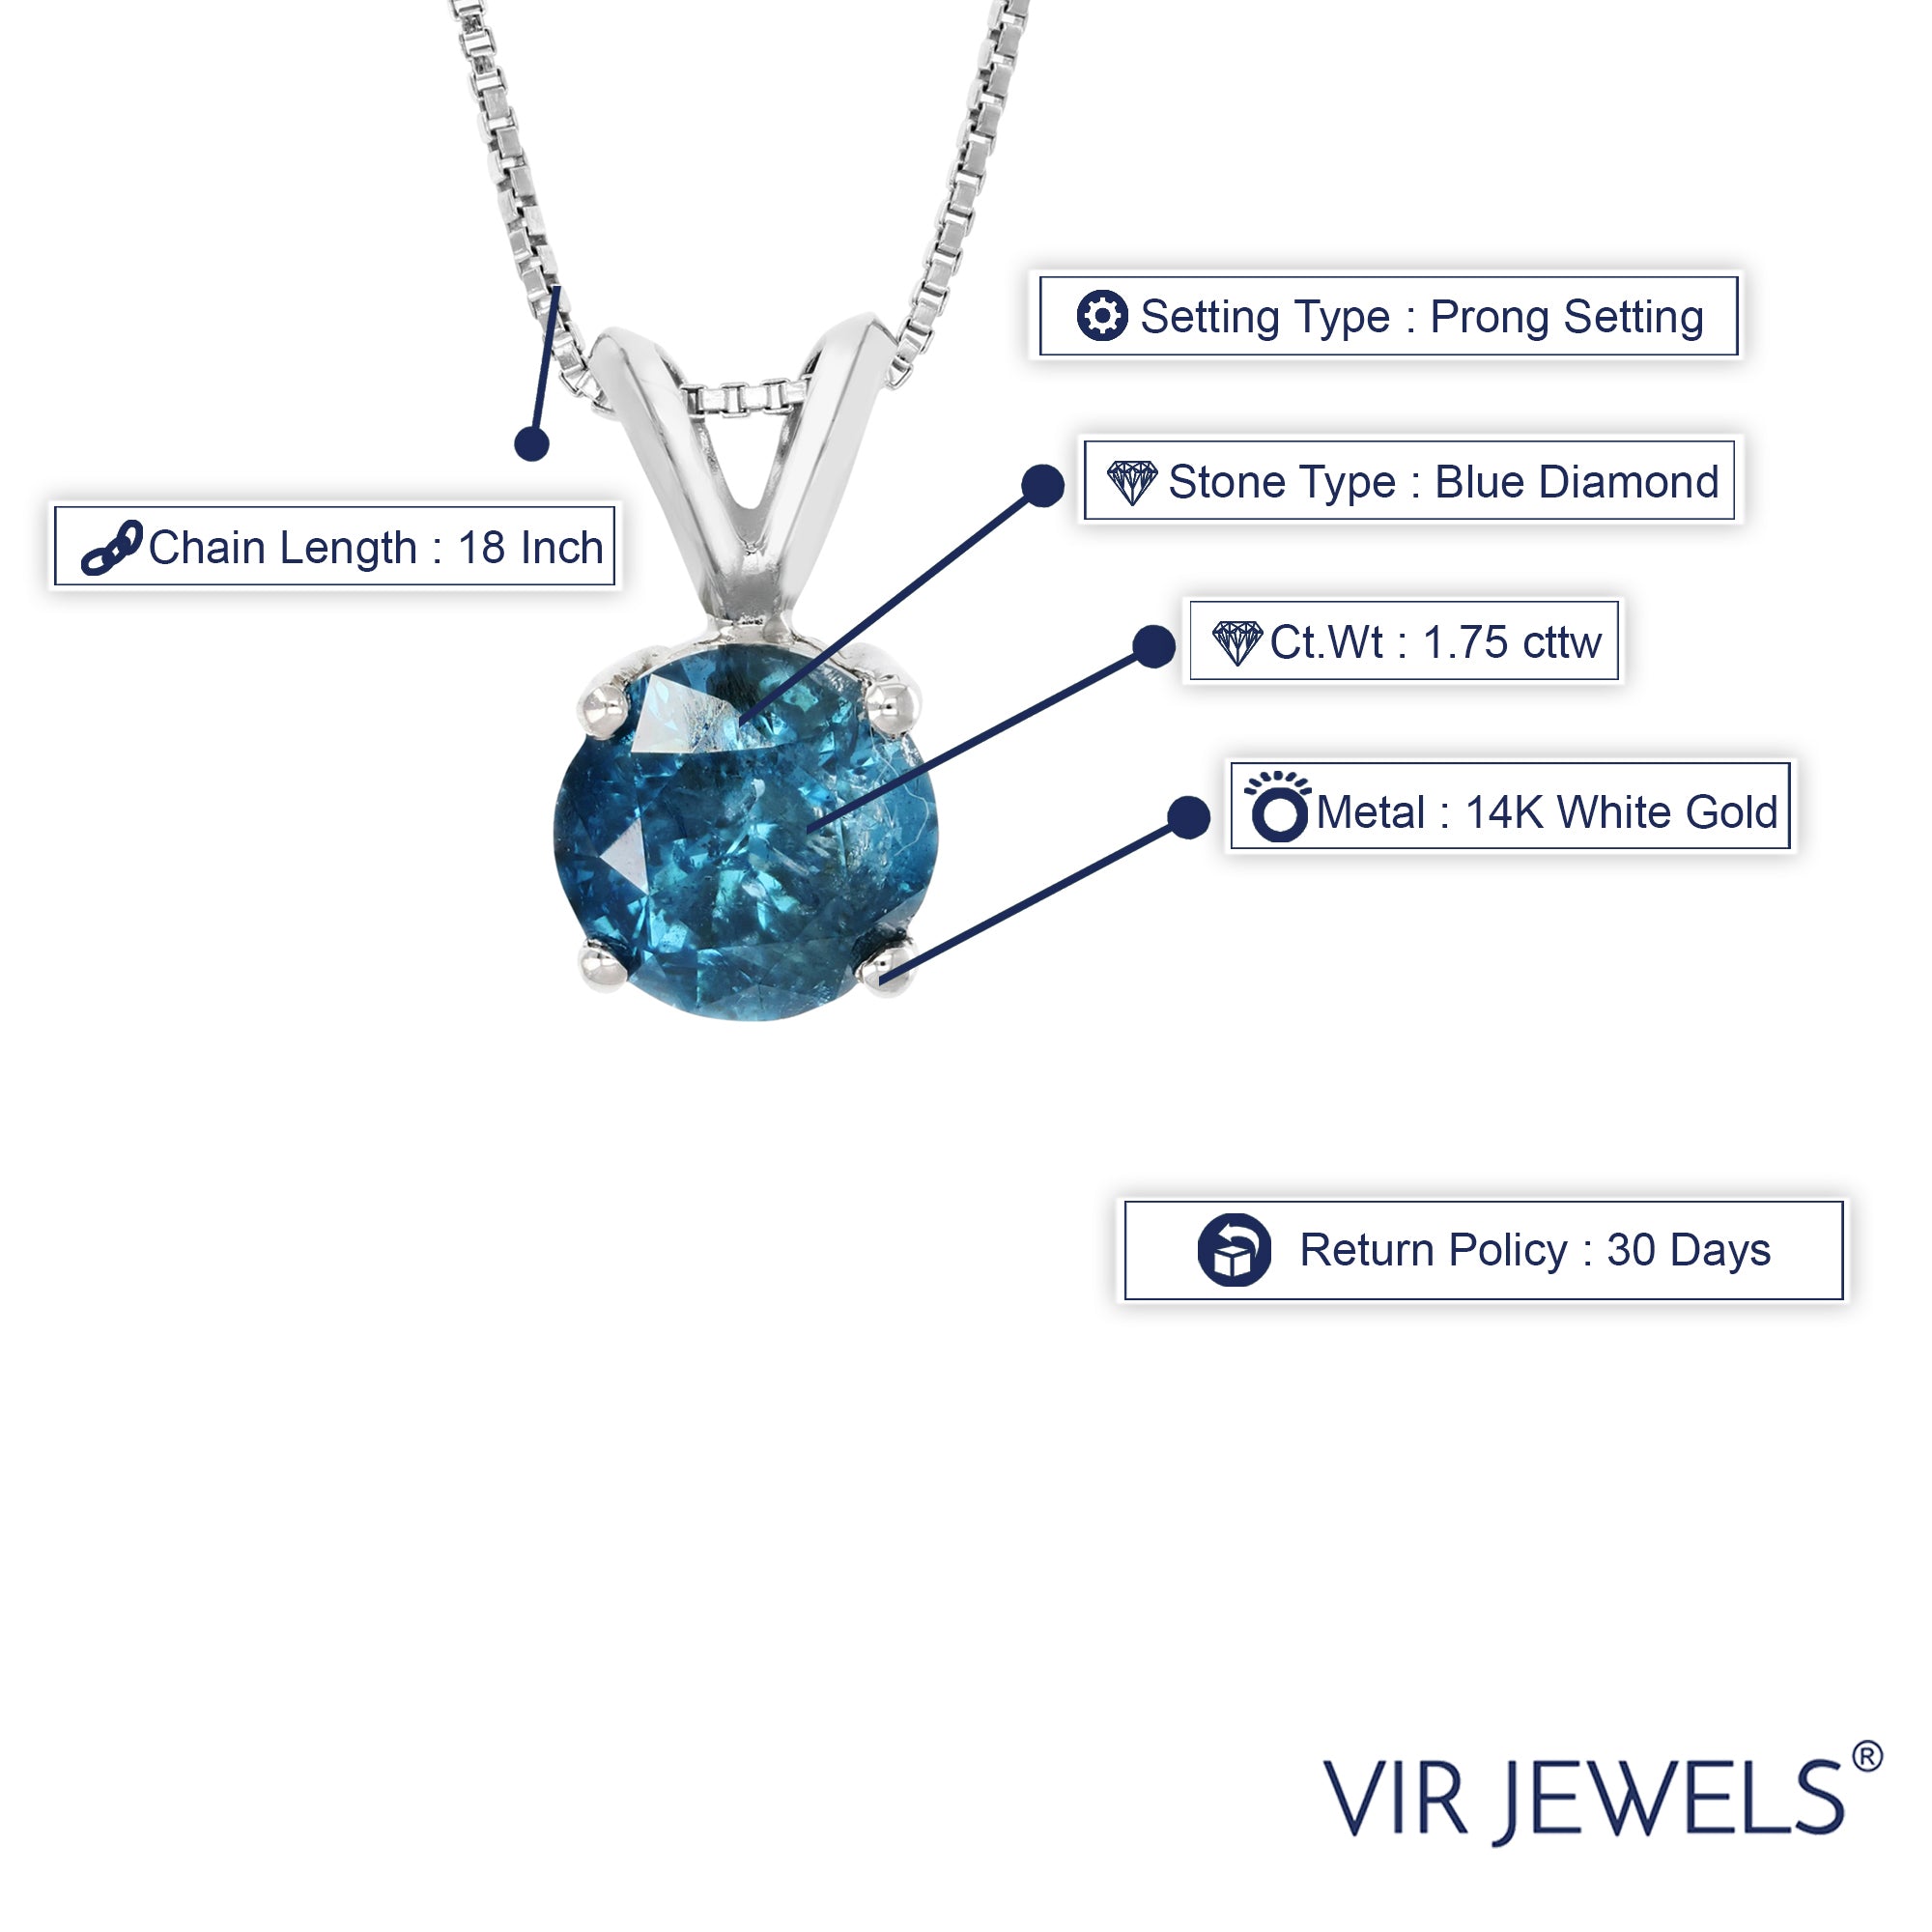 1.75 cttw Diamond Pendant, Blue Diamond Solitaire Pendant Necklace for Women in 14K White Gold with 18 Inch Chain, Prong Setting